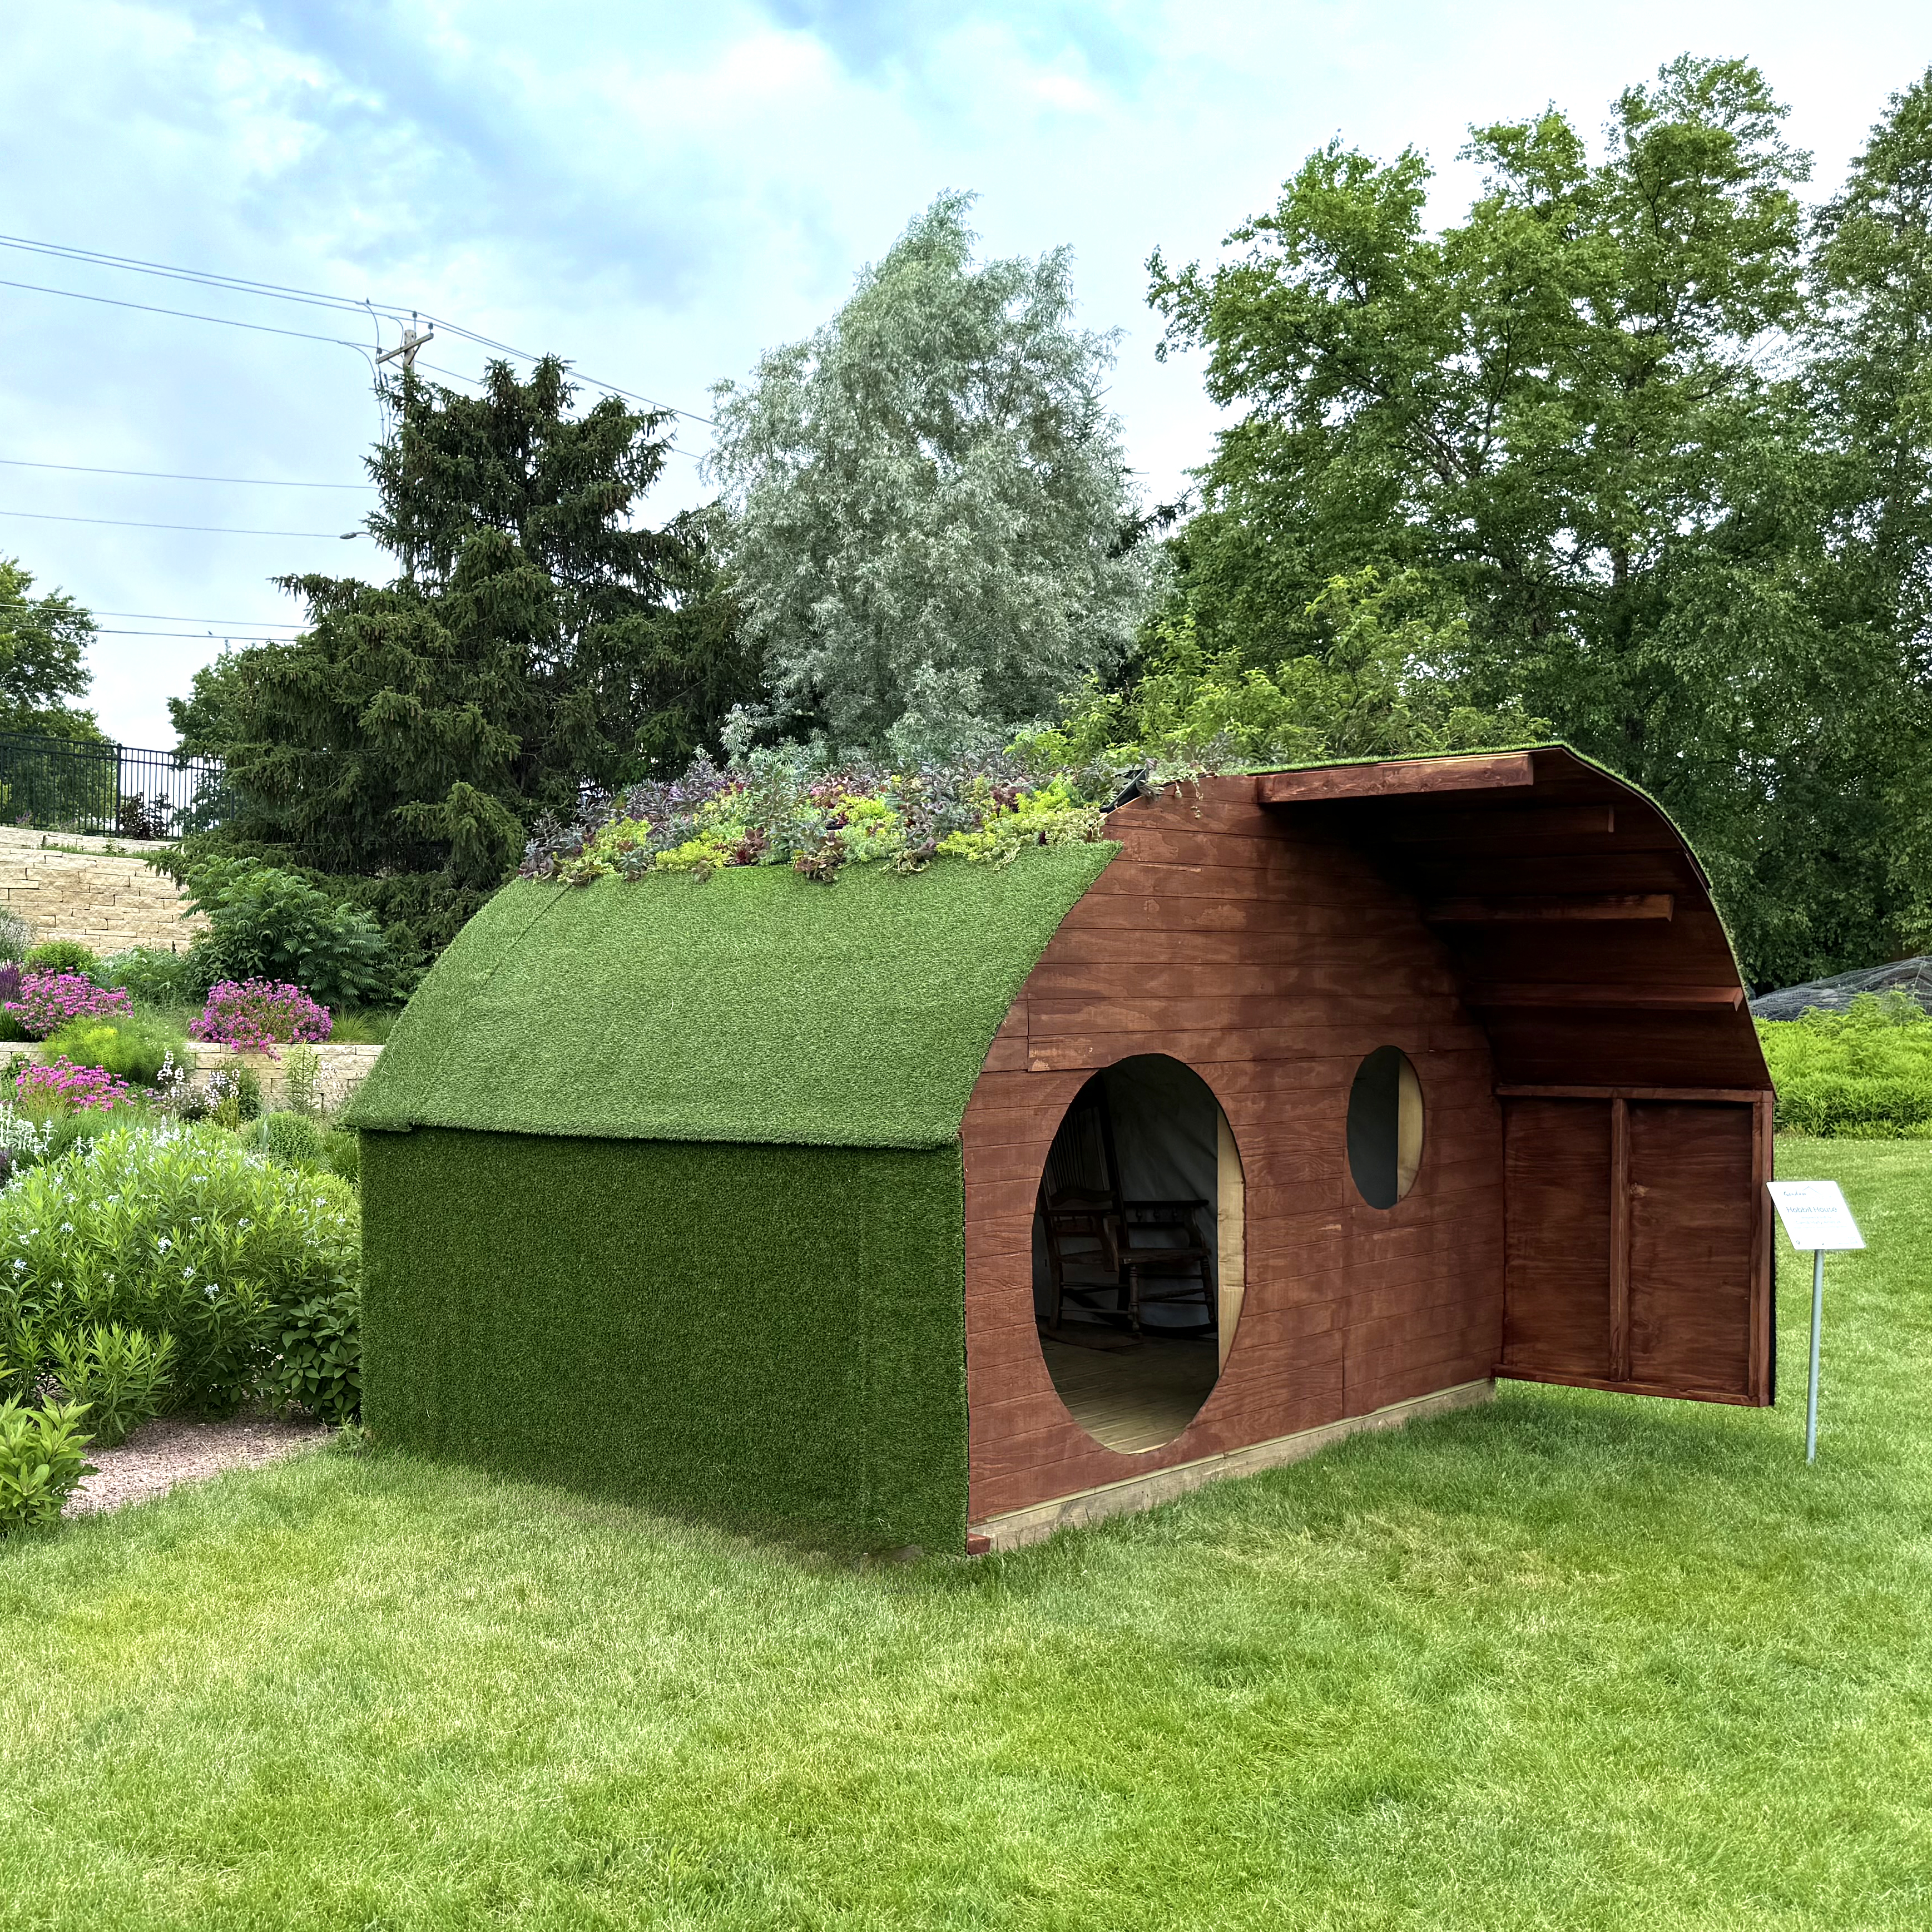 Playhouse with rounded roof covered in succulents and grass